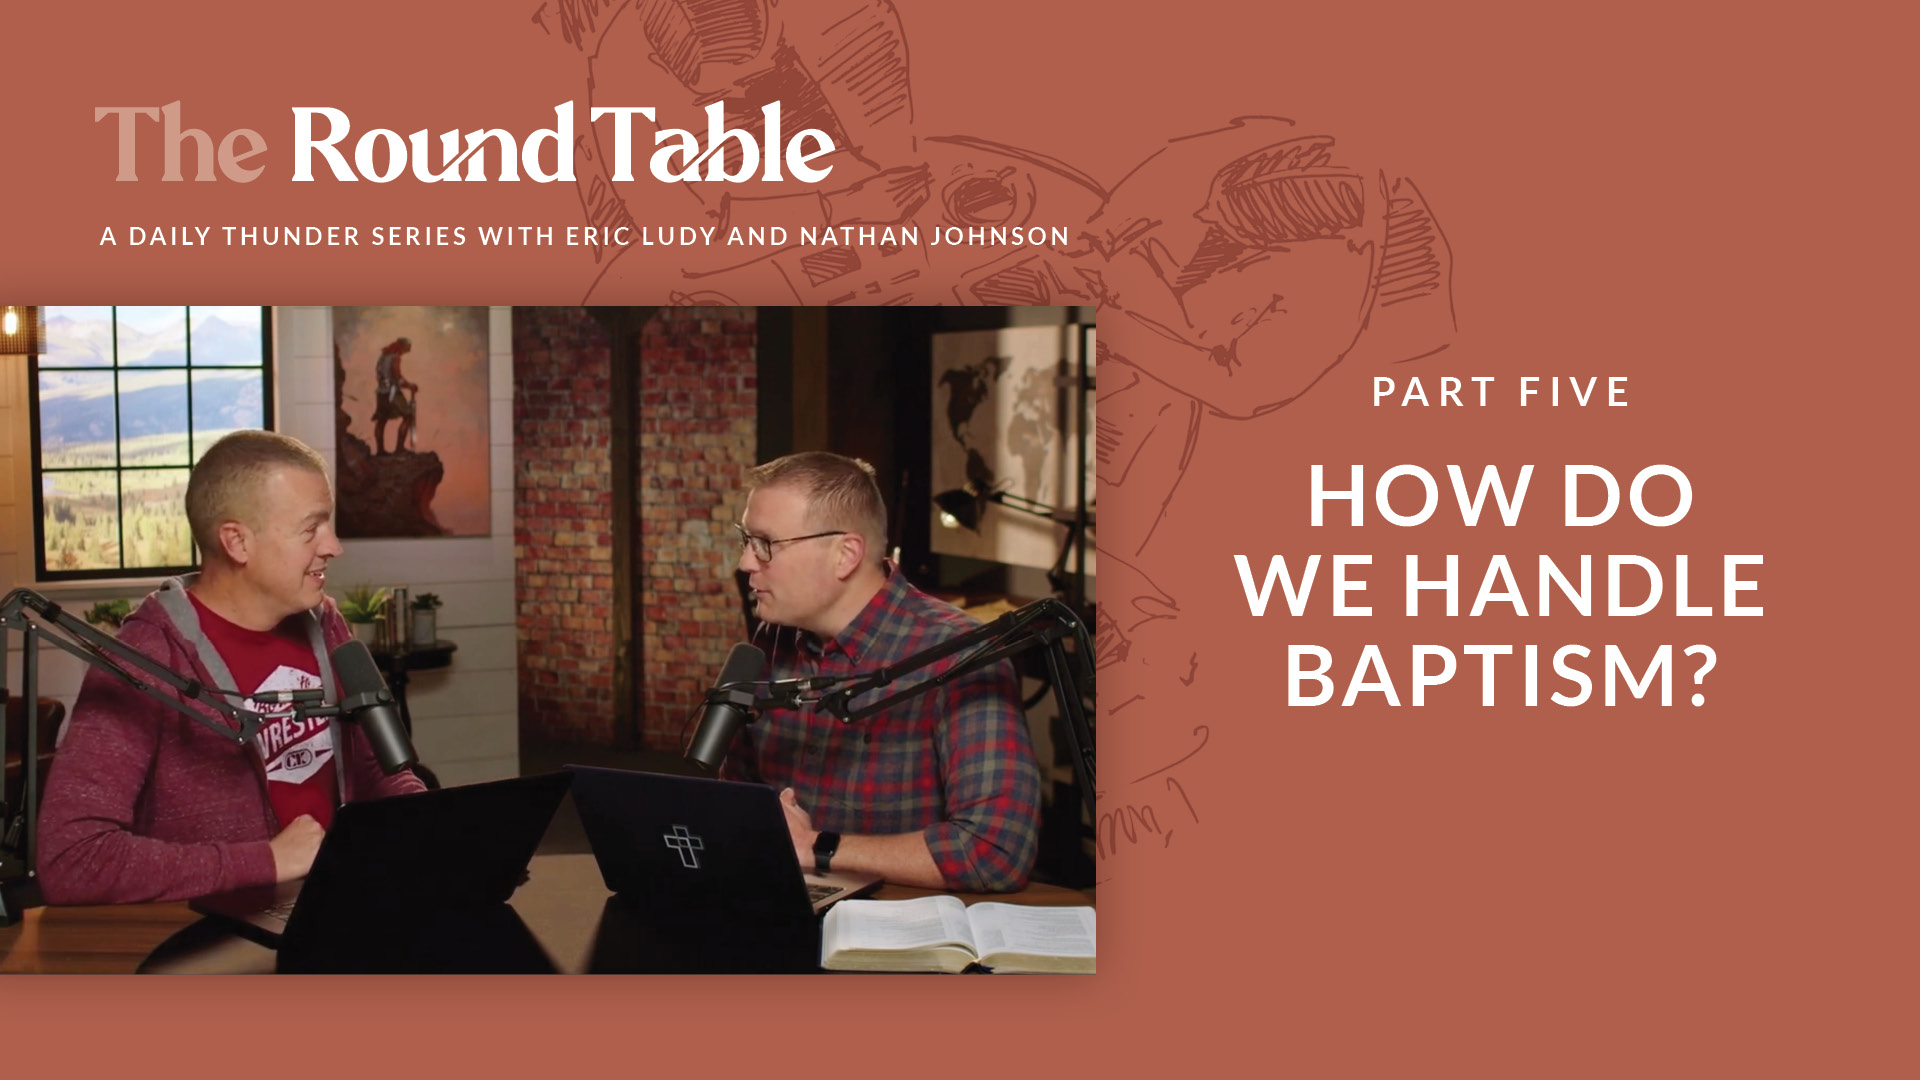 How do we handle baptism?